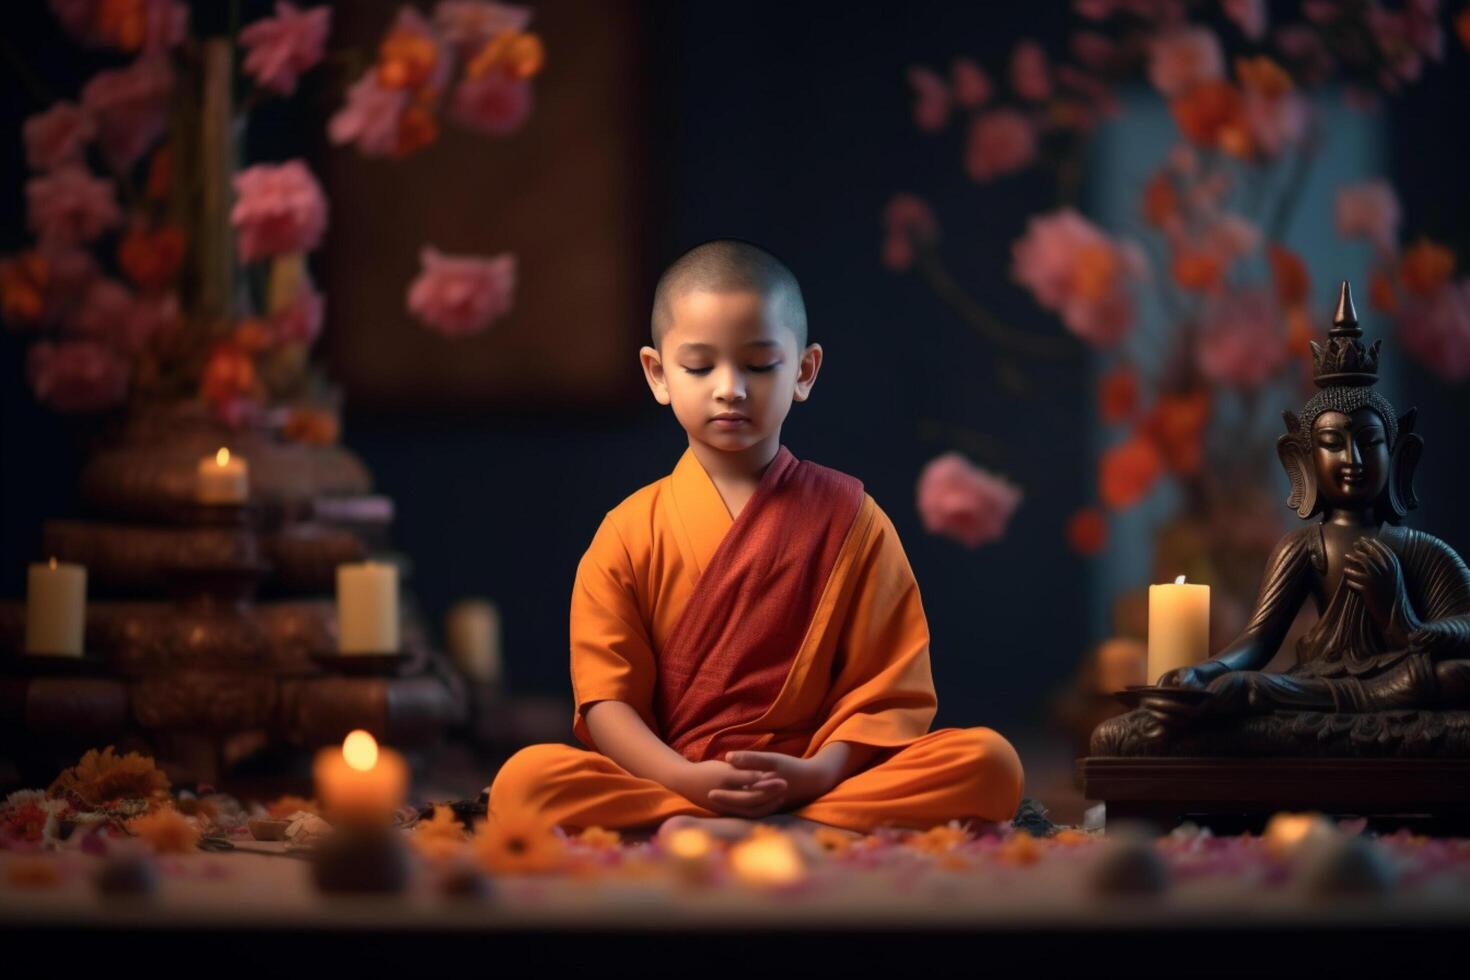 A young buddha sits in a garden with a lotus and candles. Background for vesak festival celebration. Vesak day concept. Vesak celebration day greetings by photo